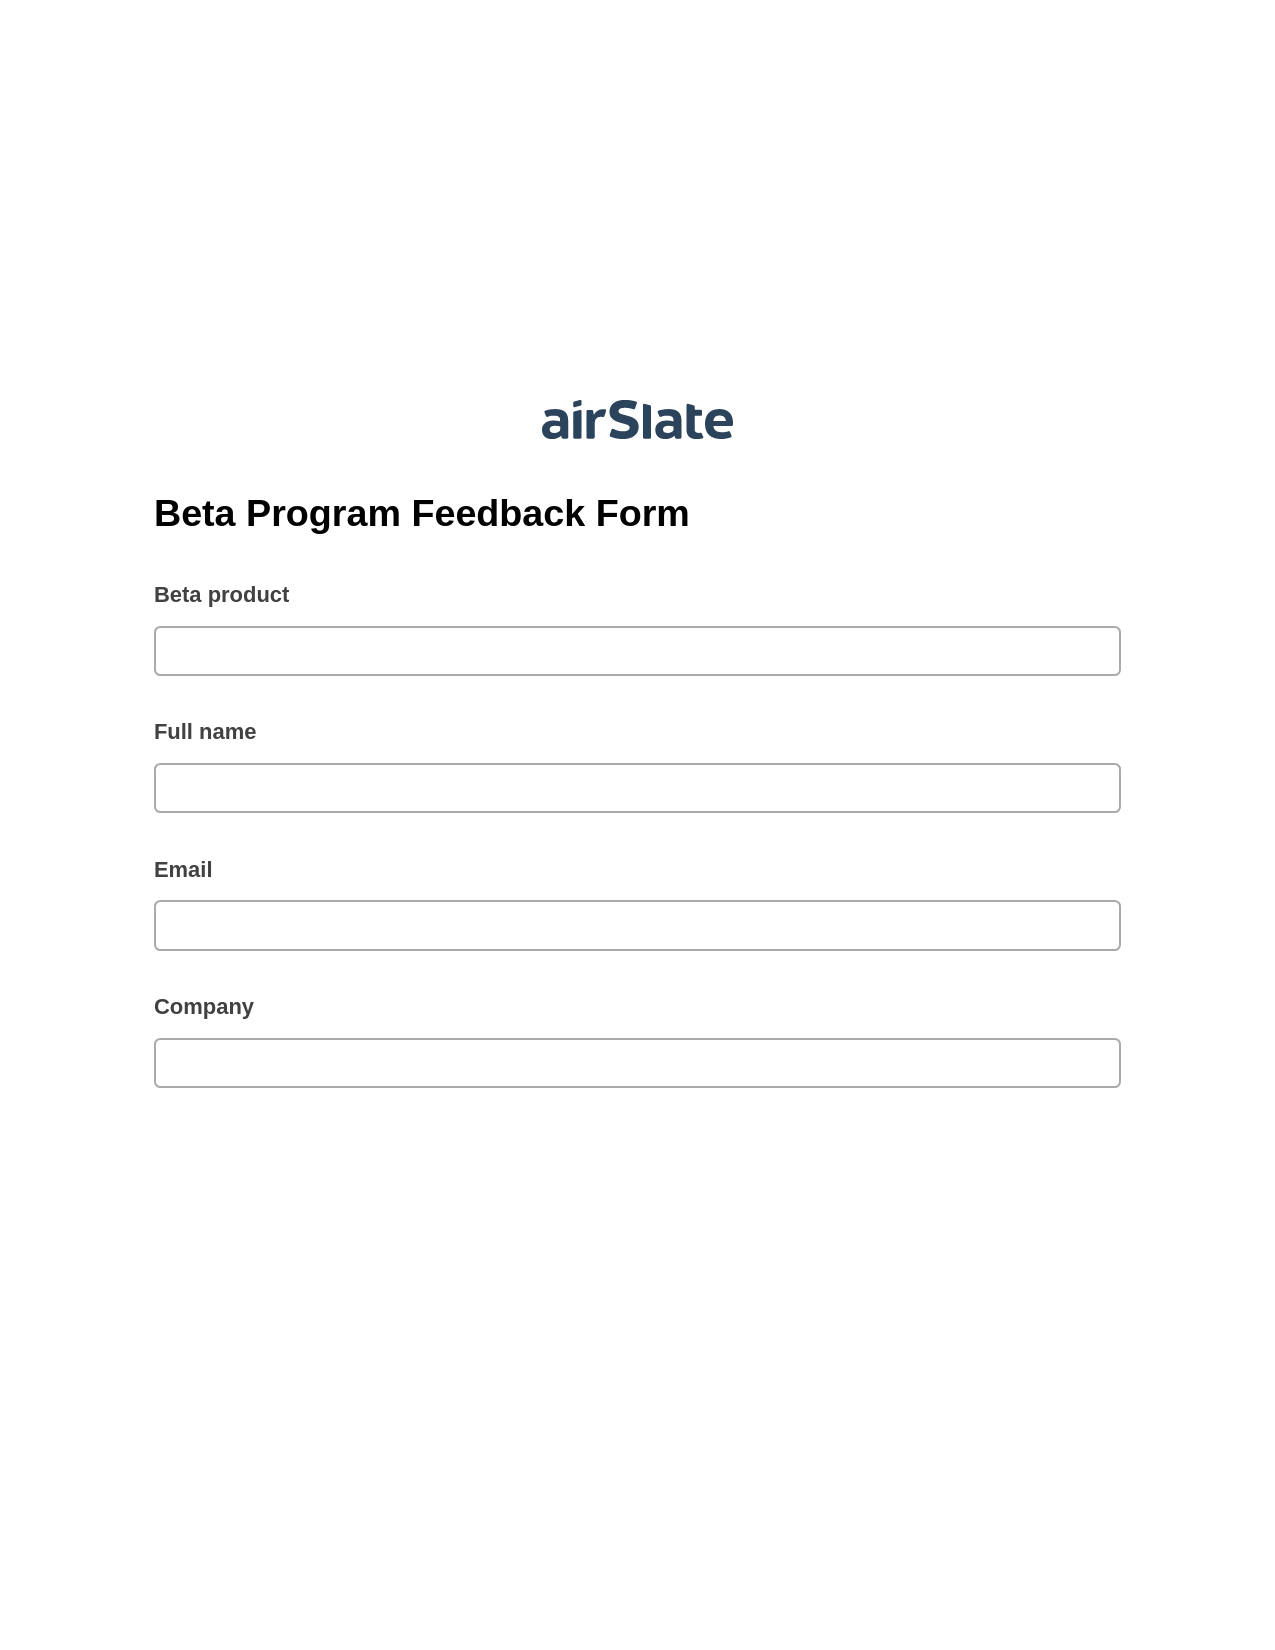 Beta Program Feedback Form Pre-fill from Google Sheets Bot, Update Salesforce Record Bot, Export to Formstack Documents Bot